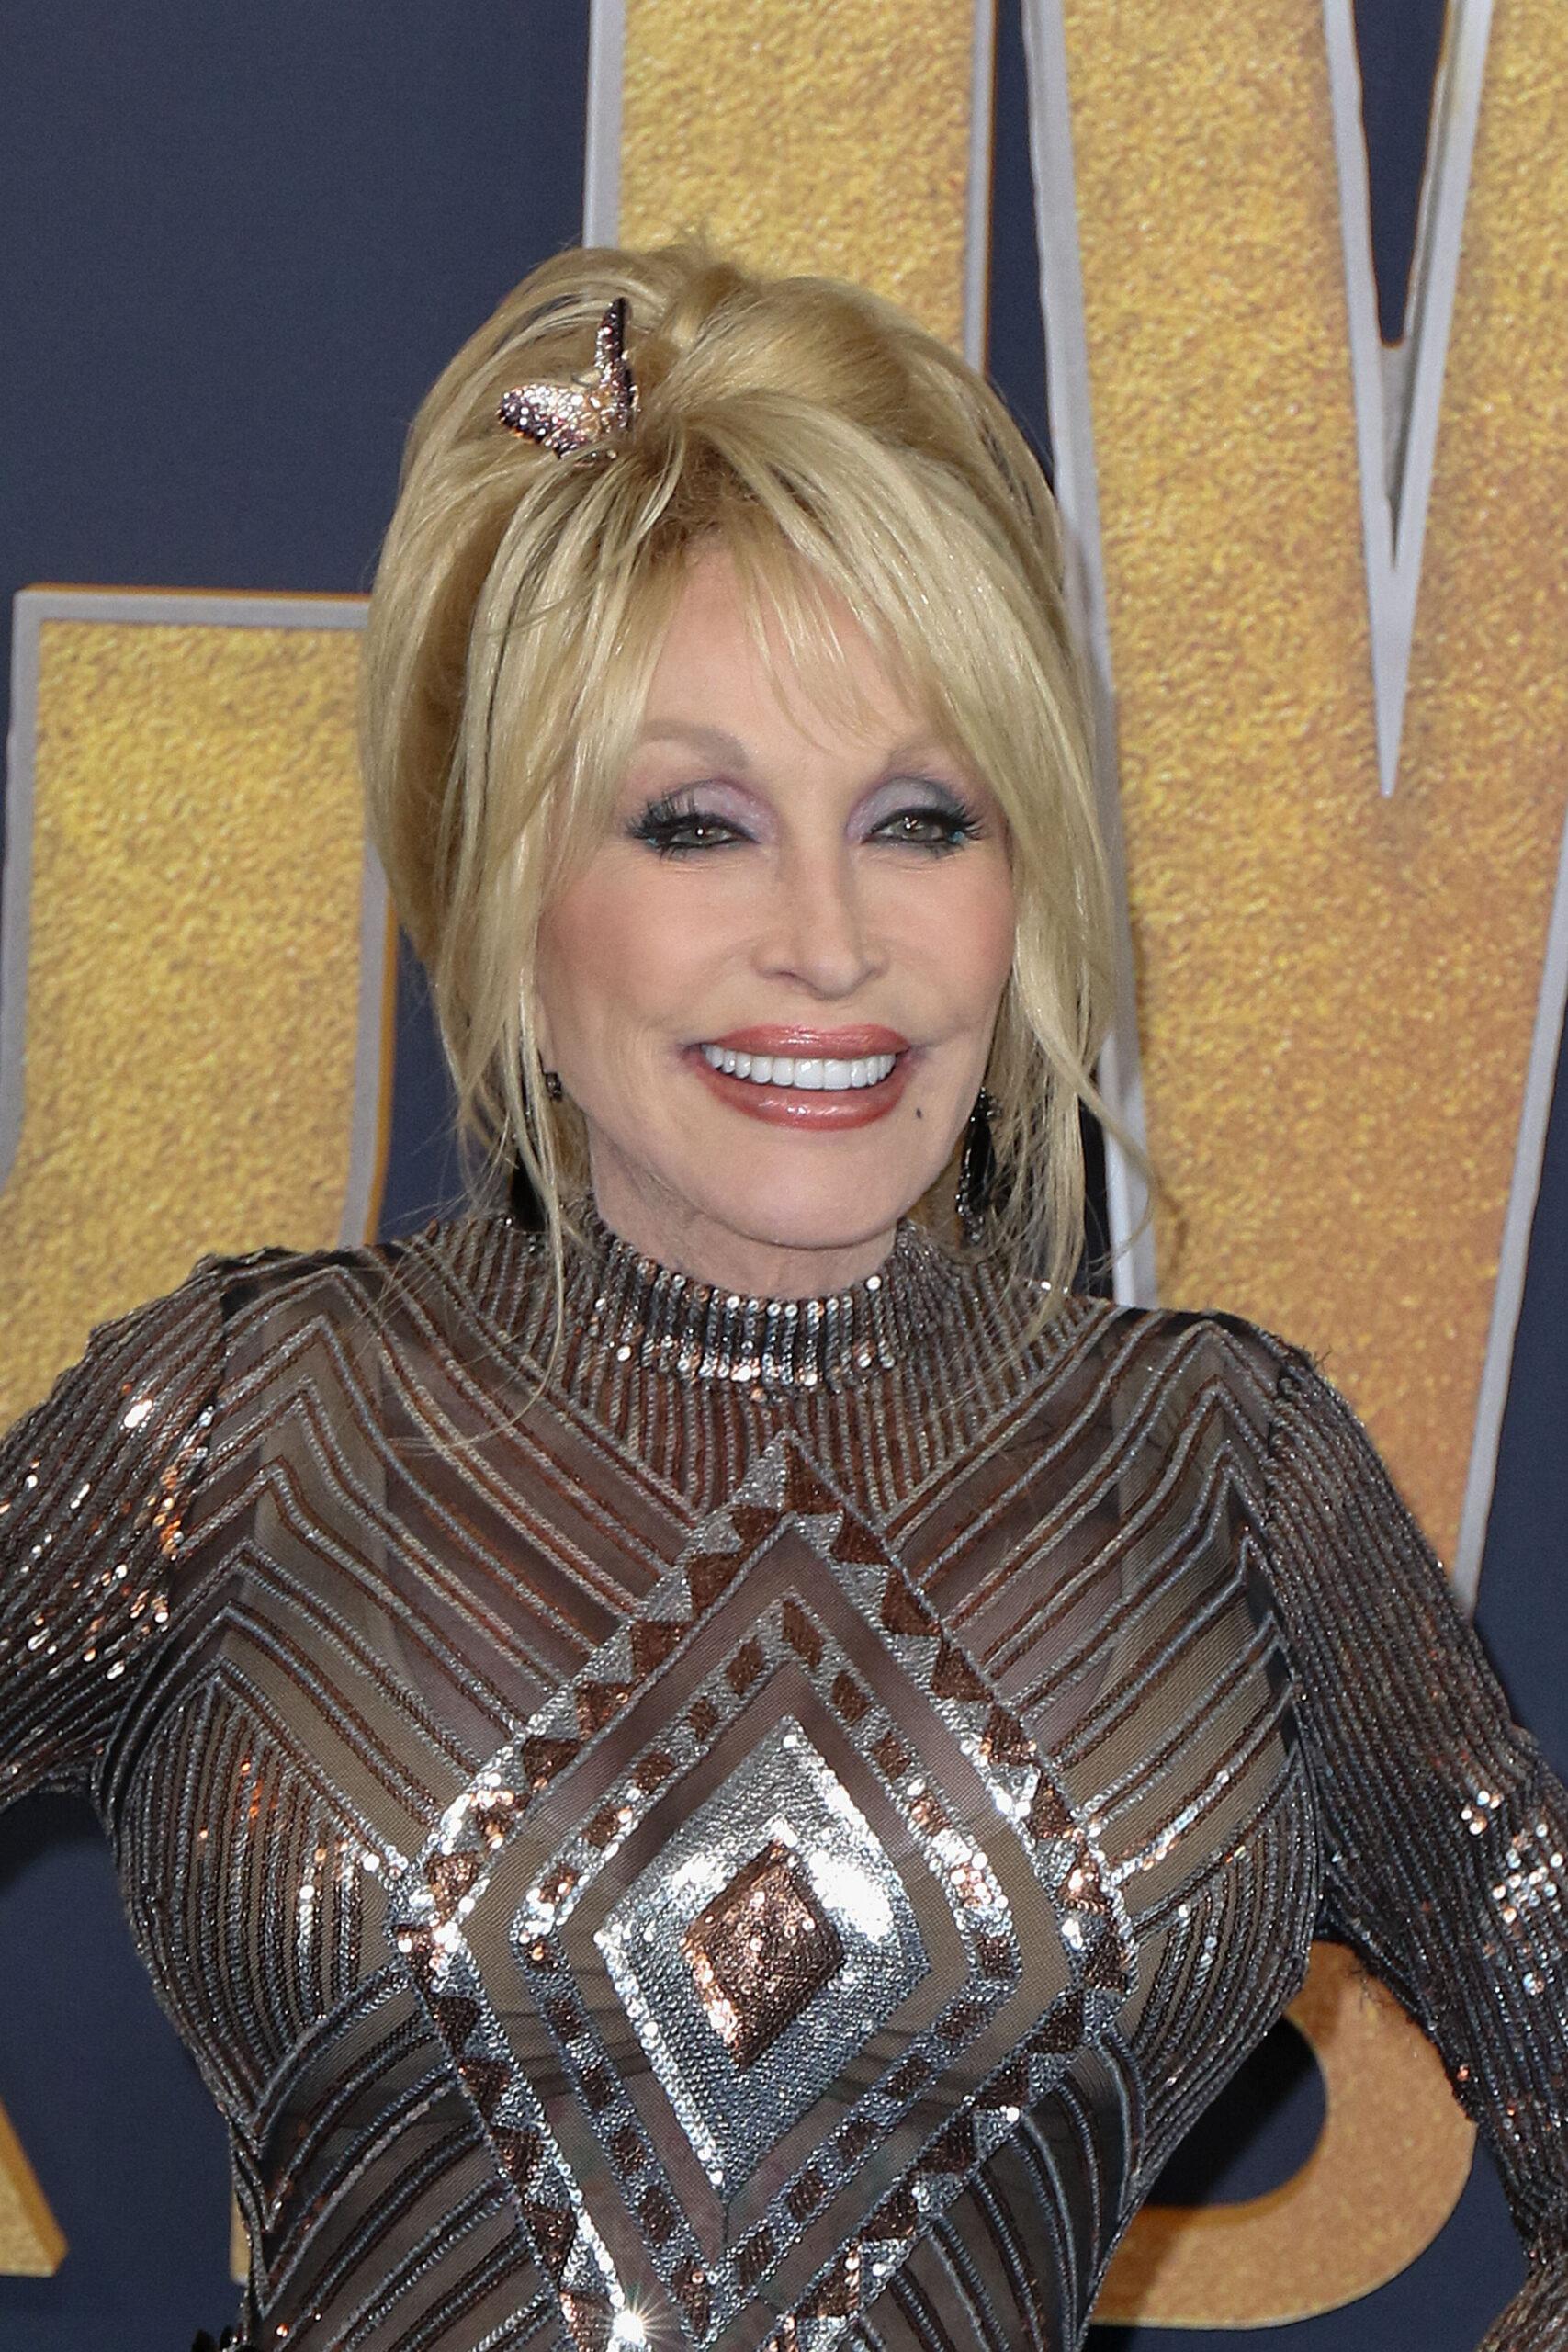 Dolly Parton at the 57th ACM Awards in Las Vegas